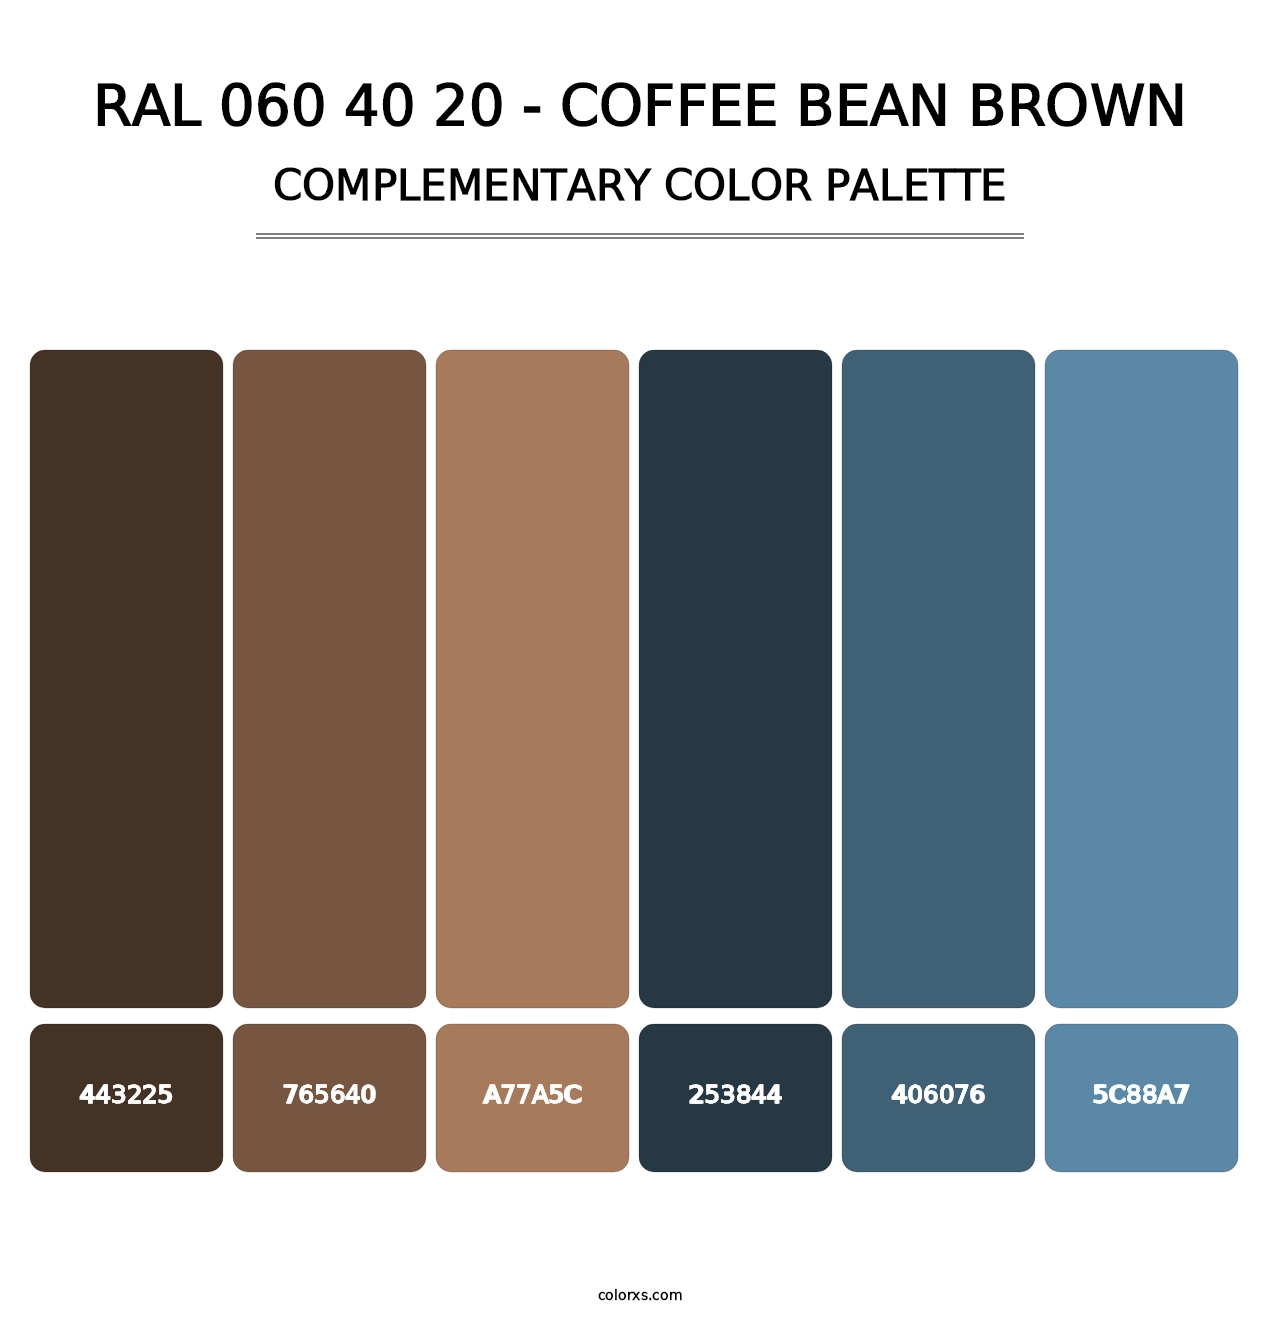 RAL 060 40 20 - Coffee Bean Brown - Complementary Color Palette